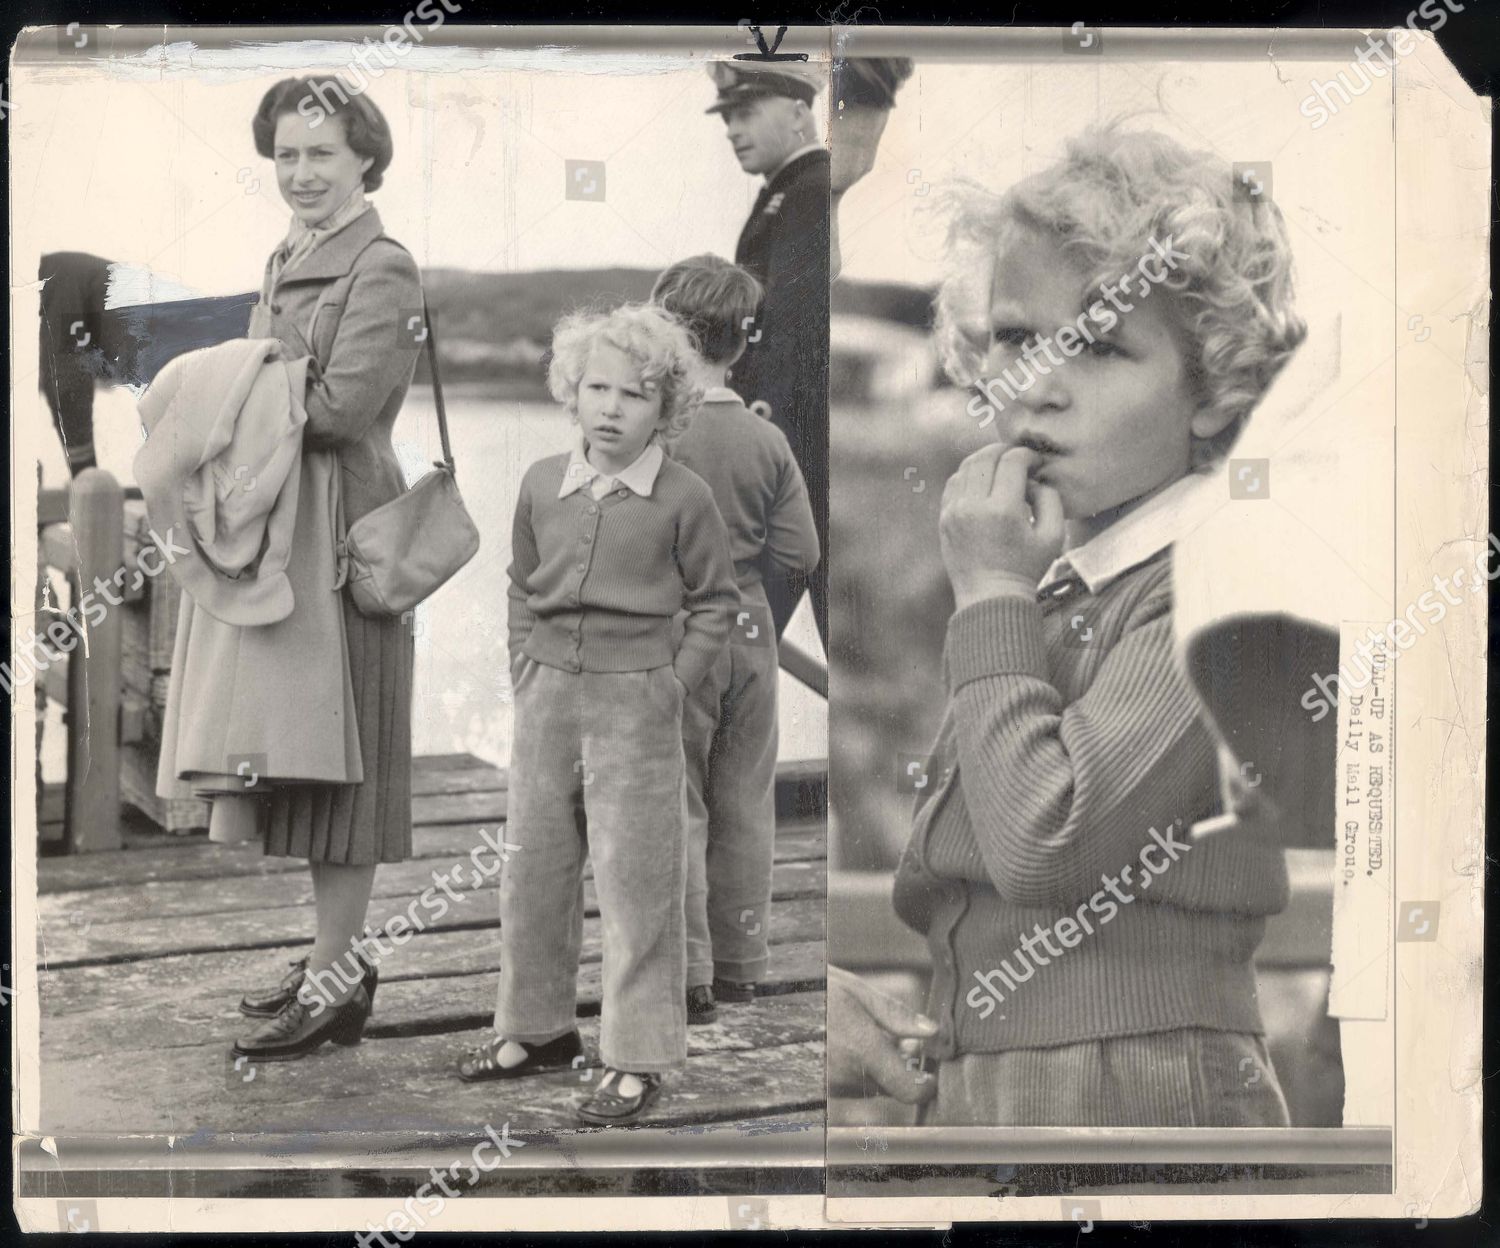 princess-royal-1956-early-life-picture-shows-princess-anne-on-her-sixth-birthday-stepping-ashore-at-loch-skiport-south-uist-with-prince-charles-and-princess-margaret-during-the-royal-tour-of-the-western-isles-shutterstock-editorial-884349a.jpg